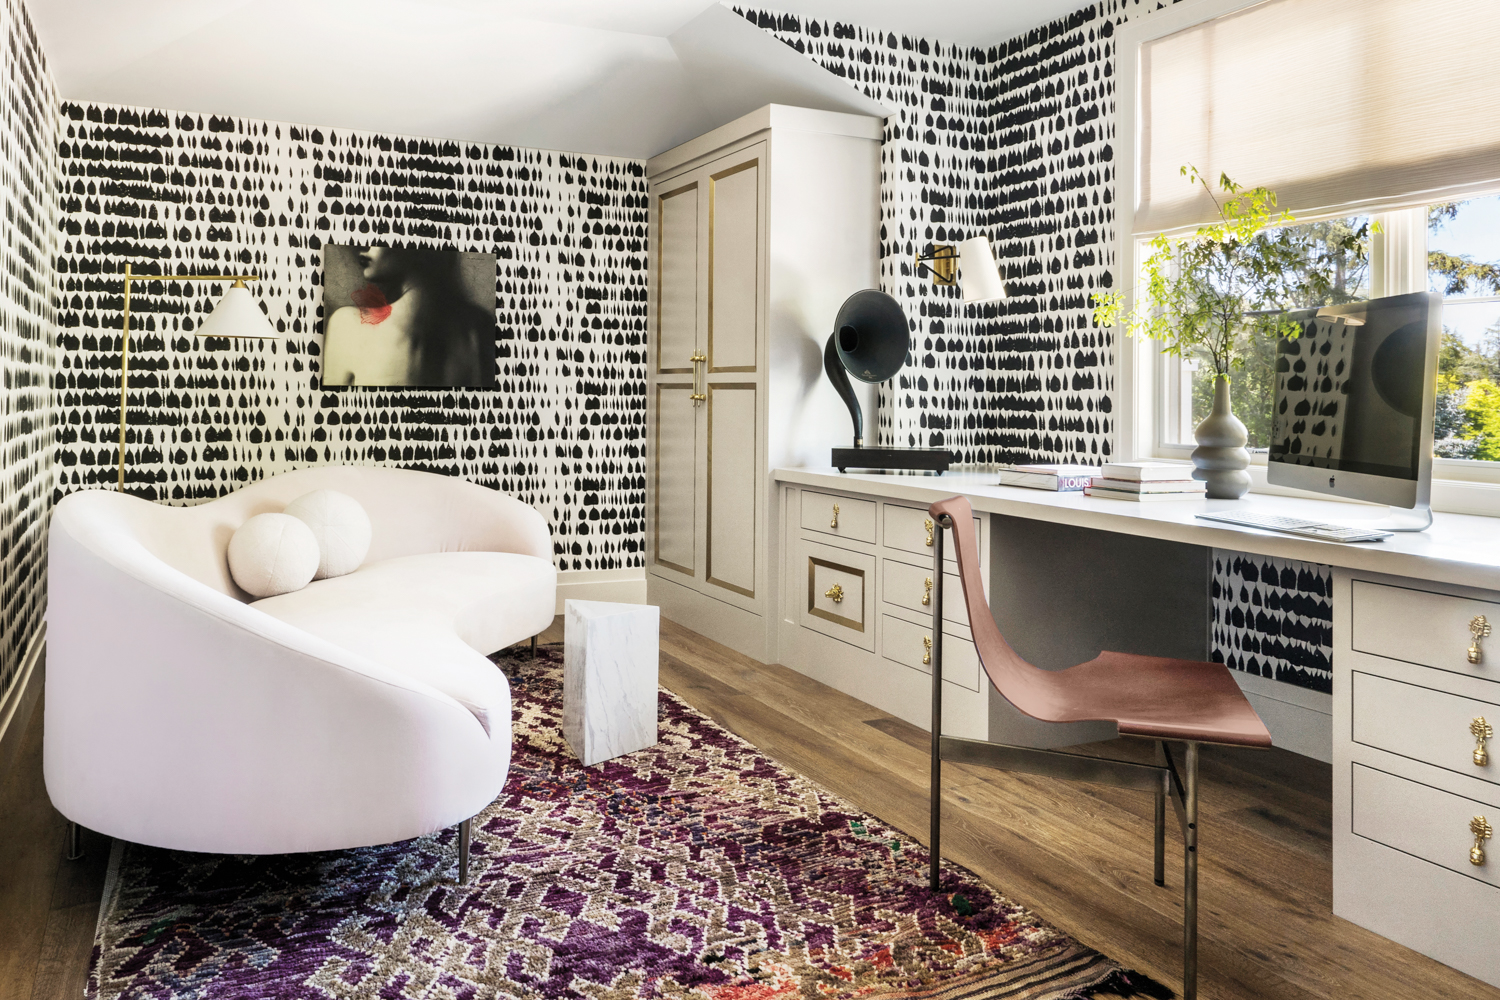 The wife's office features a black-and-white wallpaper with a raindrop pattern.